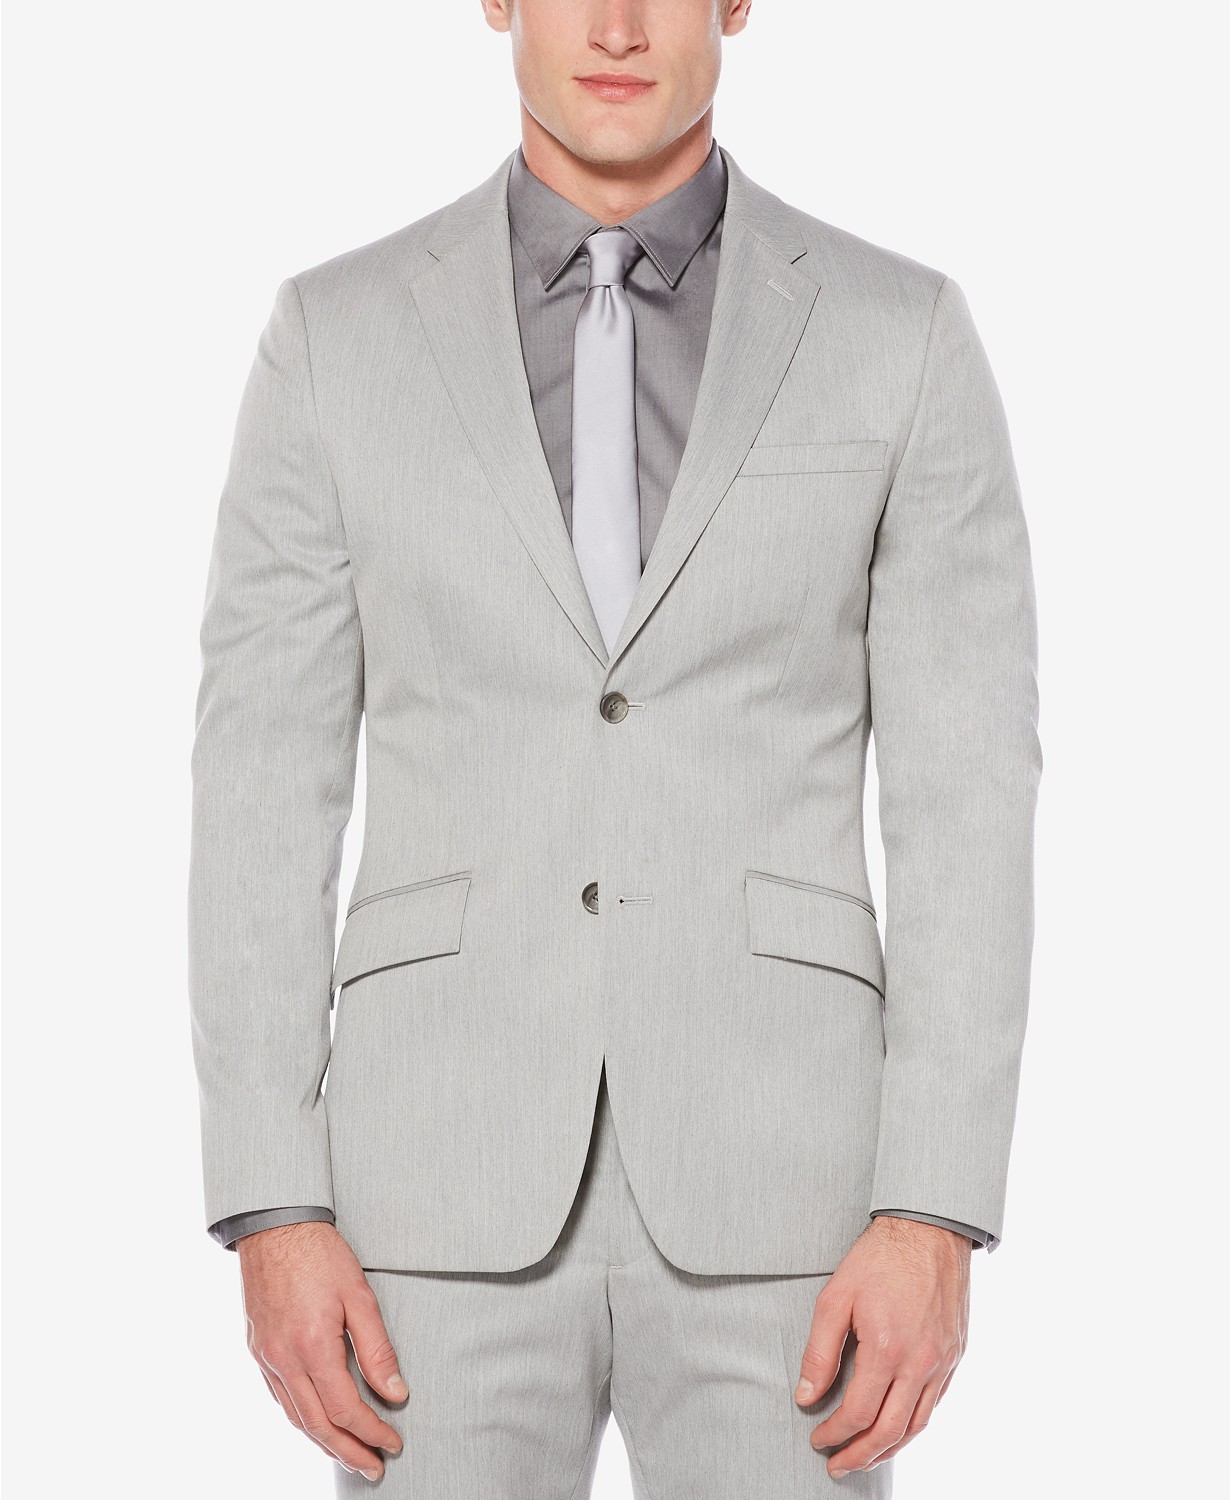 Perry Ellis Mens Heathered Two Button Blazer Jacket - image 2 of 6